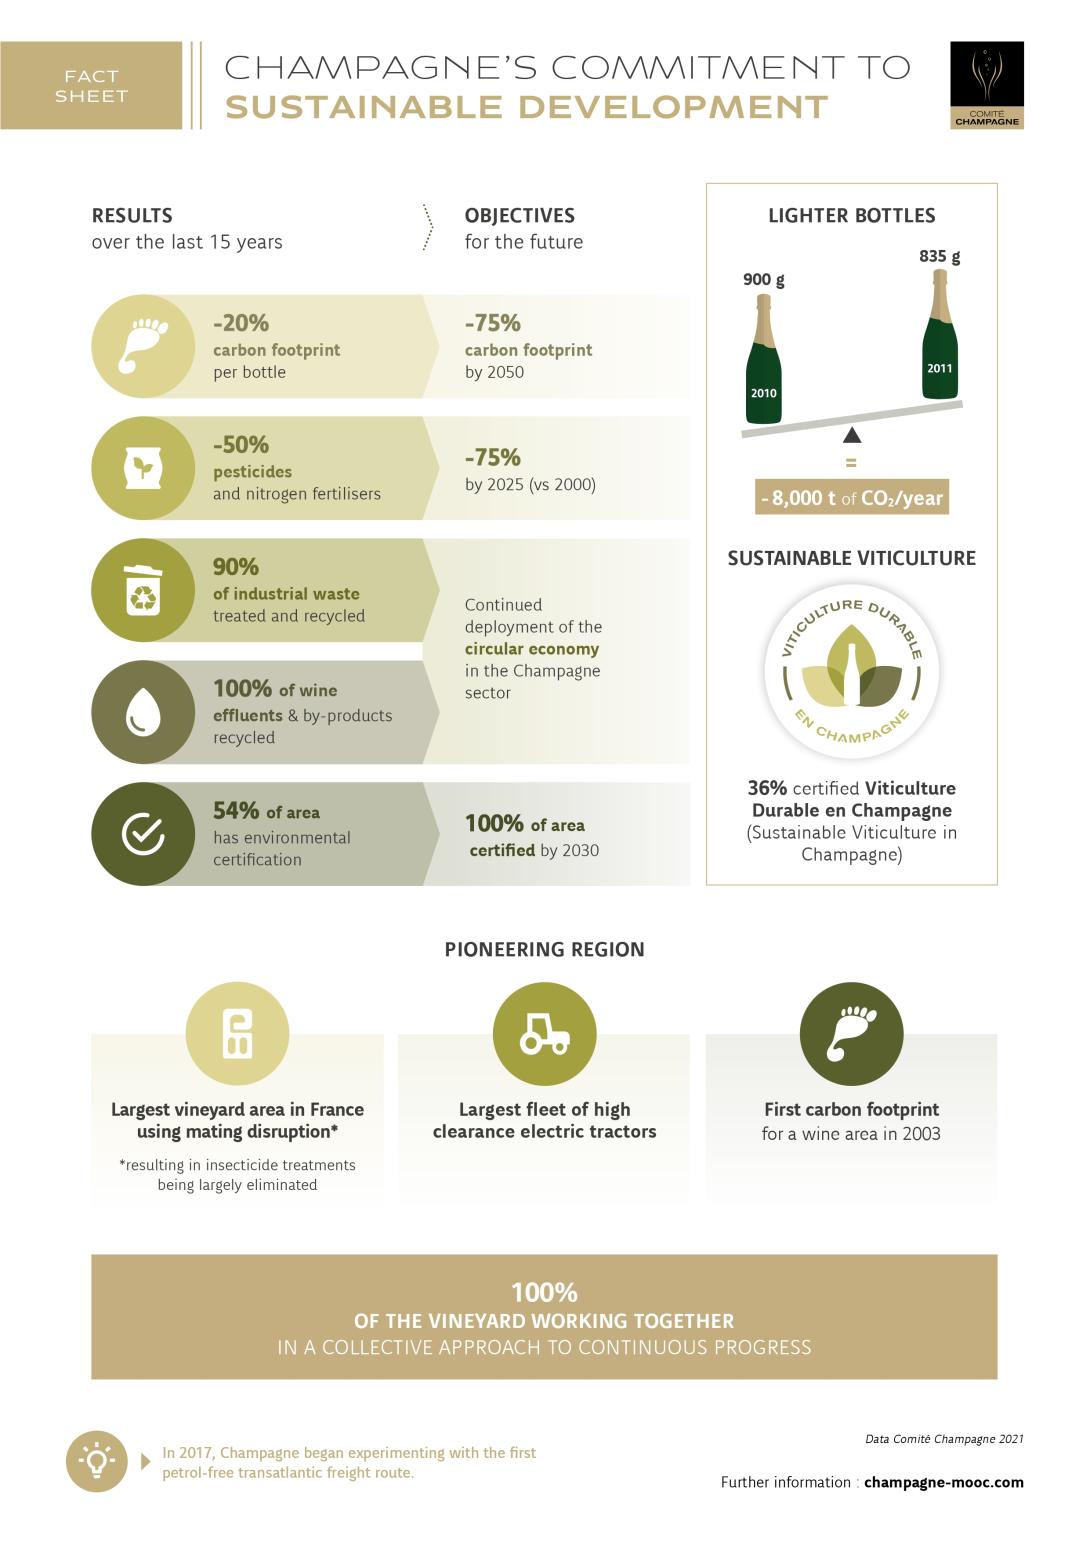 Champagne's commitment to sustainable development